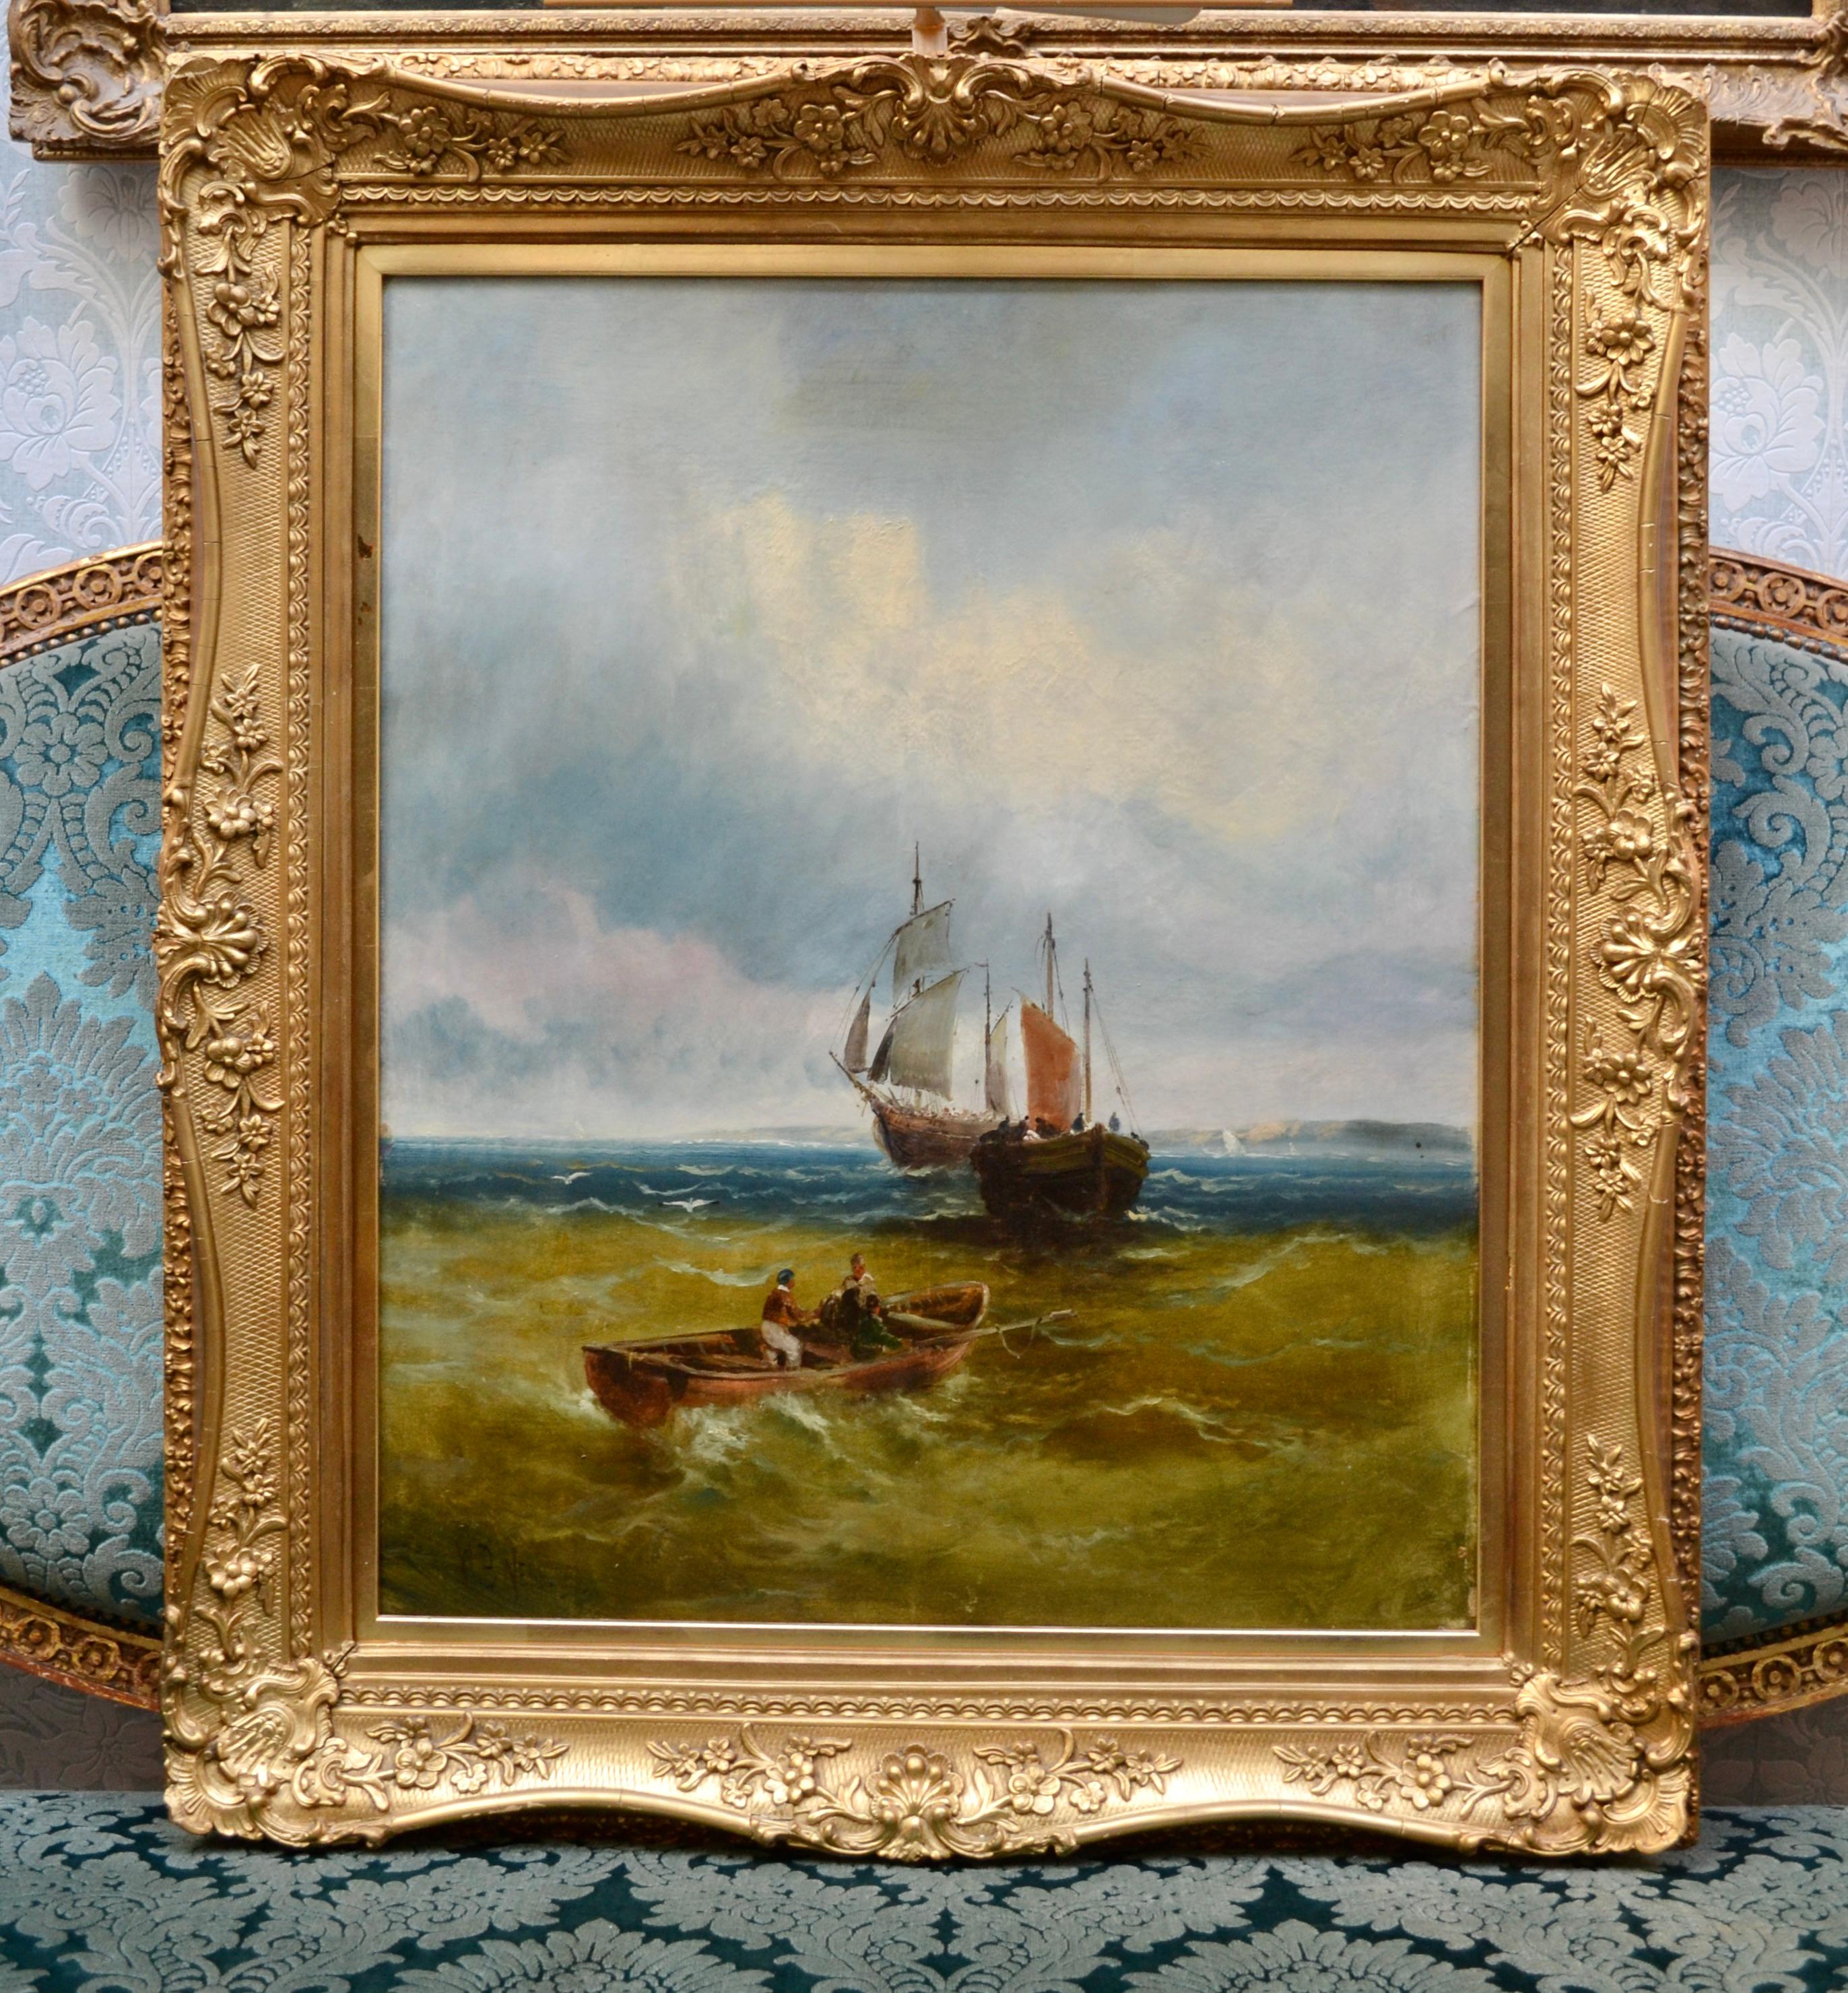 Classical late 19th century English school marine painting showing a large sailing ship out at sea in what appears to be the coast of England waiting for the return of a rowboat filled with fishermen. The smaller boat is hauling nets from where a